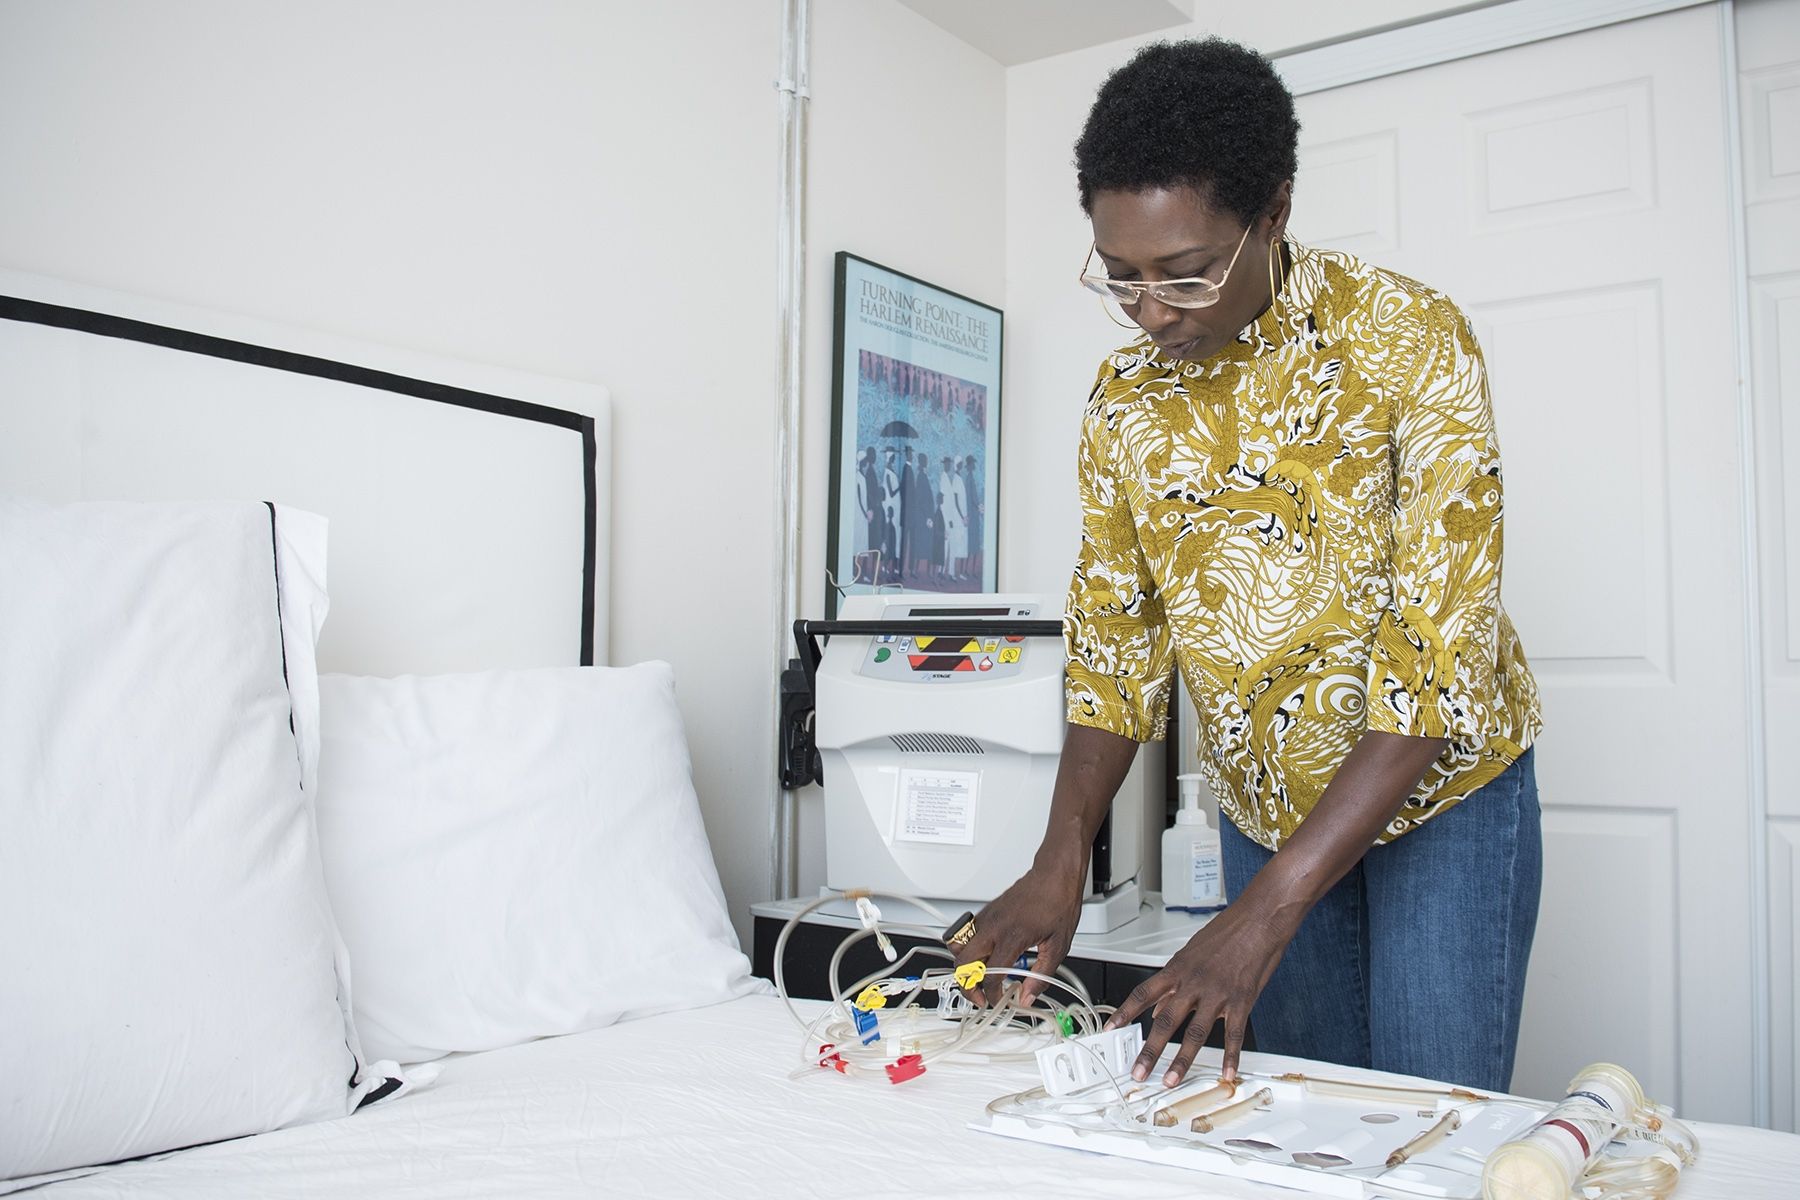 Thanks to her home dialysis machine, Patient Experience Advisor Karen Nicole Smith is able do her treatment in the comfort of her own home, rather than in a hospital setting. 